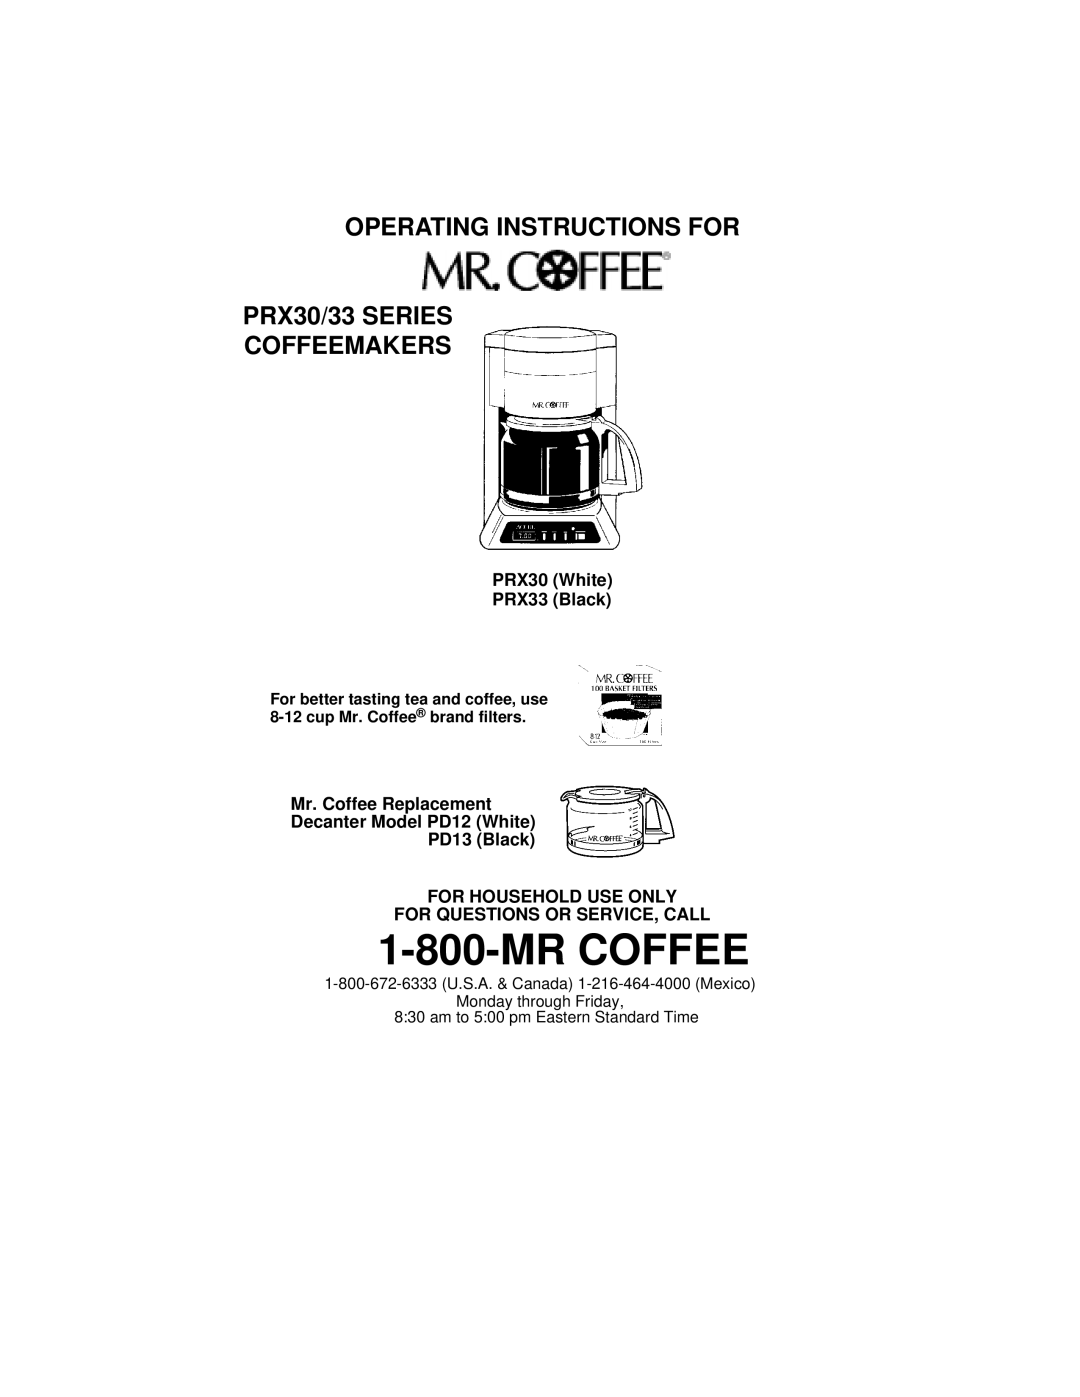 Mr. Coffee manual Mrcoffee, PRX30 White PRX33 Black, Mr. Coffee Replacement Decanter Model PD12 White, Coffeemakers 